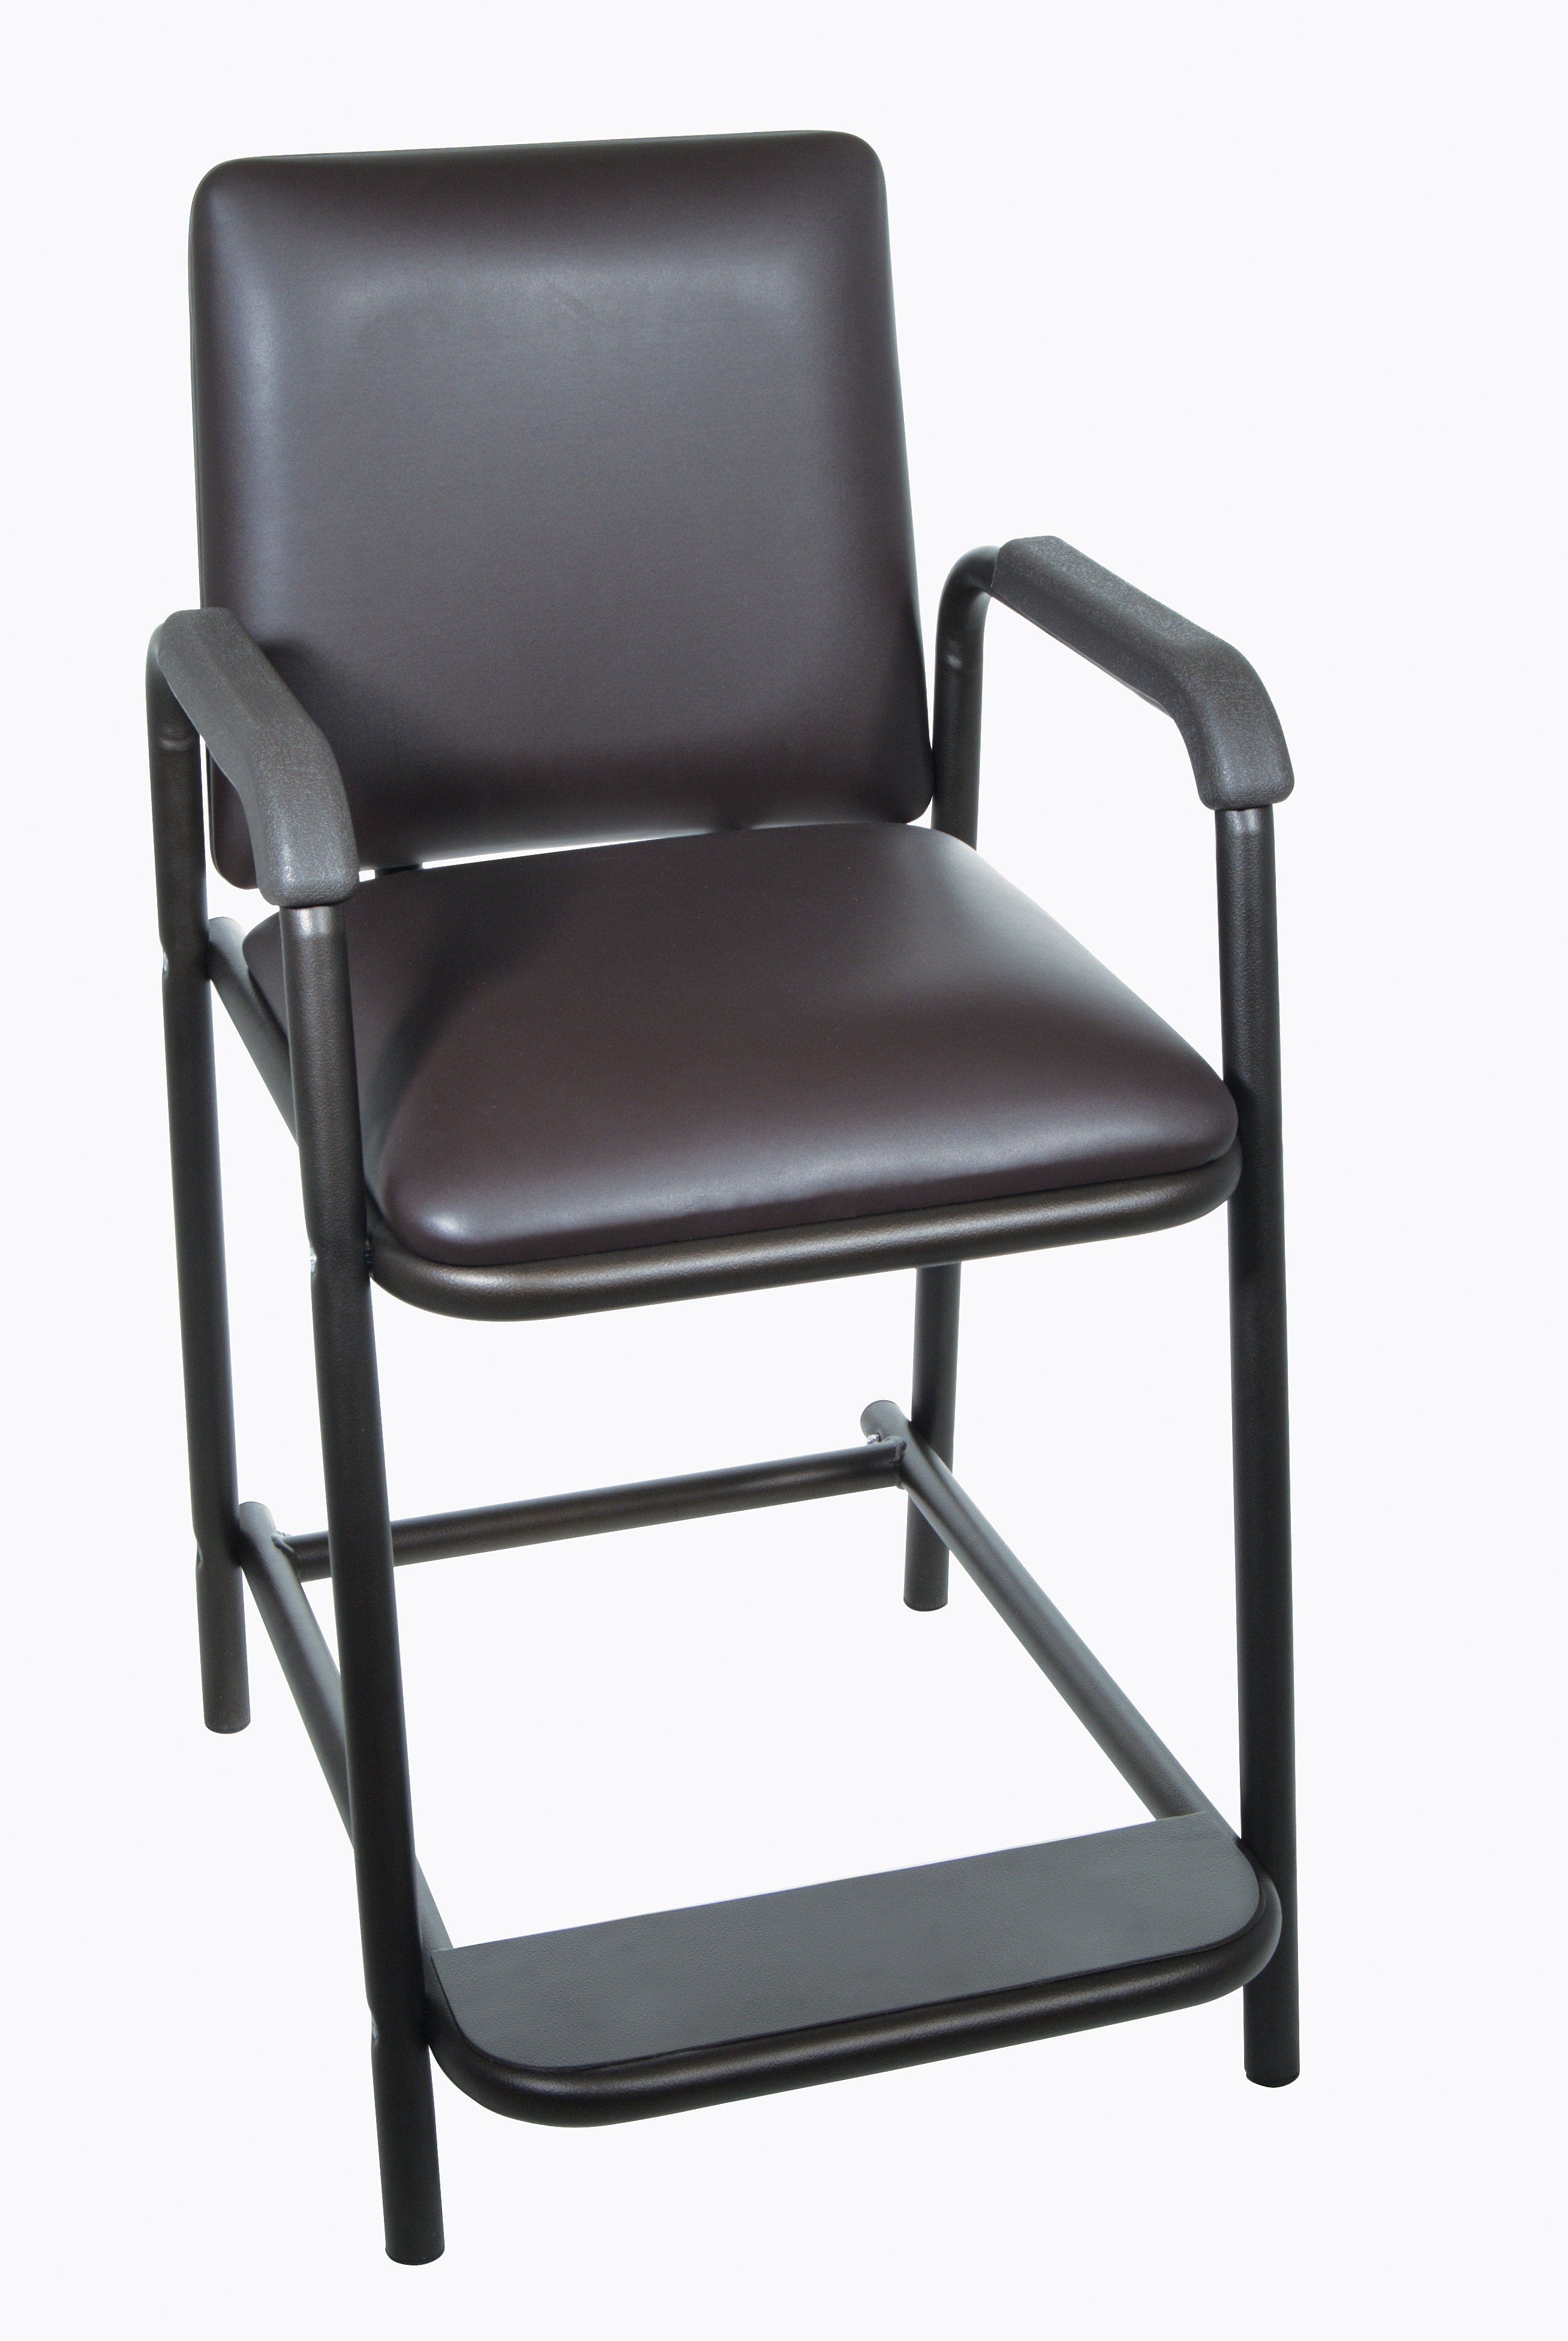 Drive Medical Patient Room Drive Medical Hip High Chair with Padded Seat